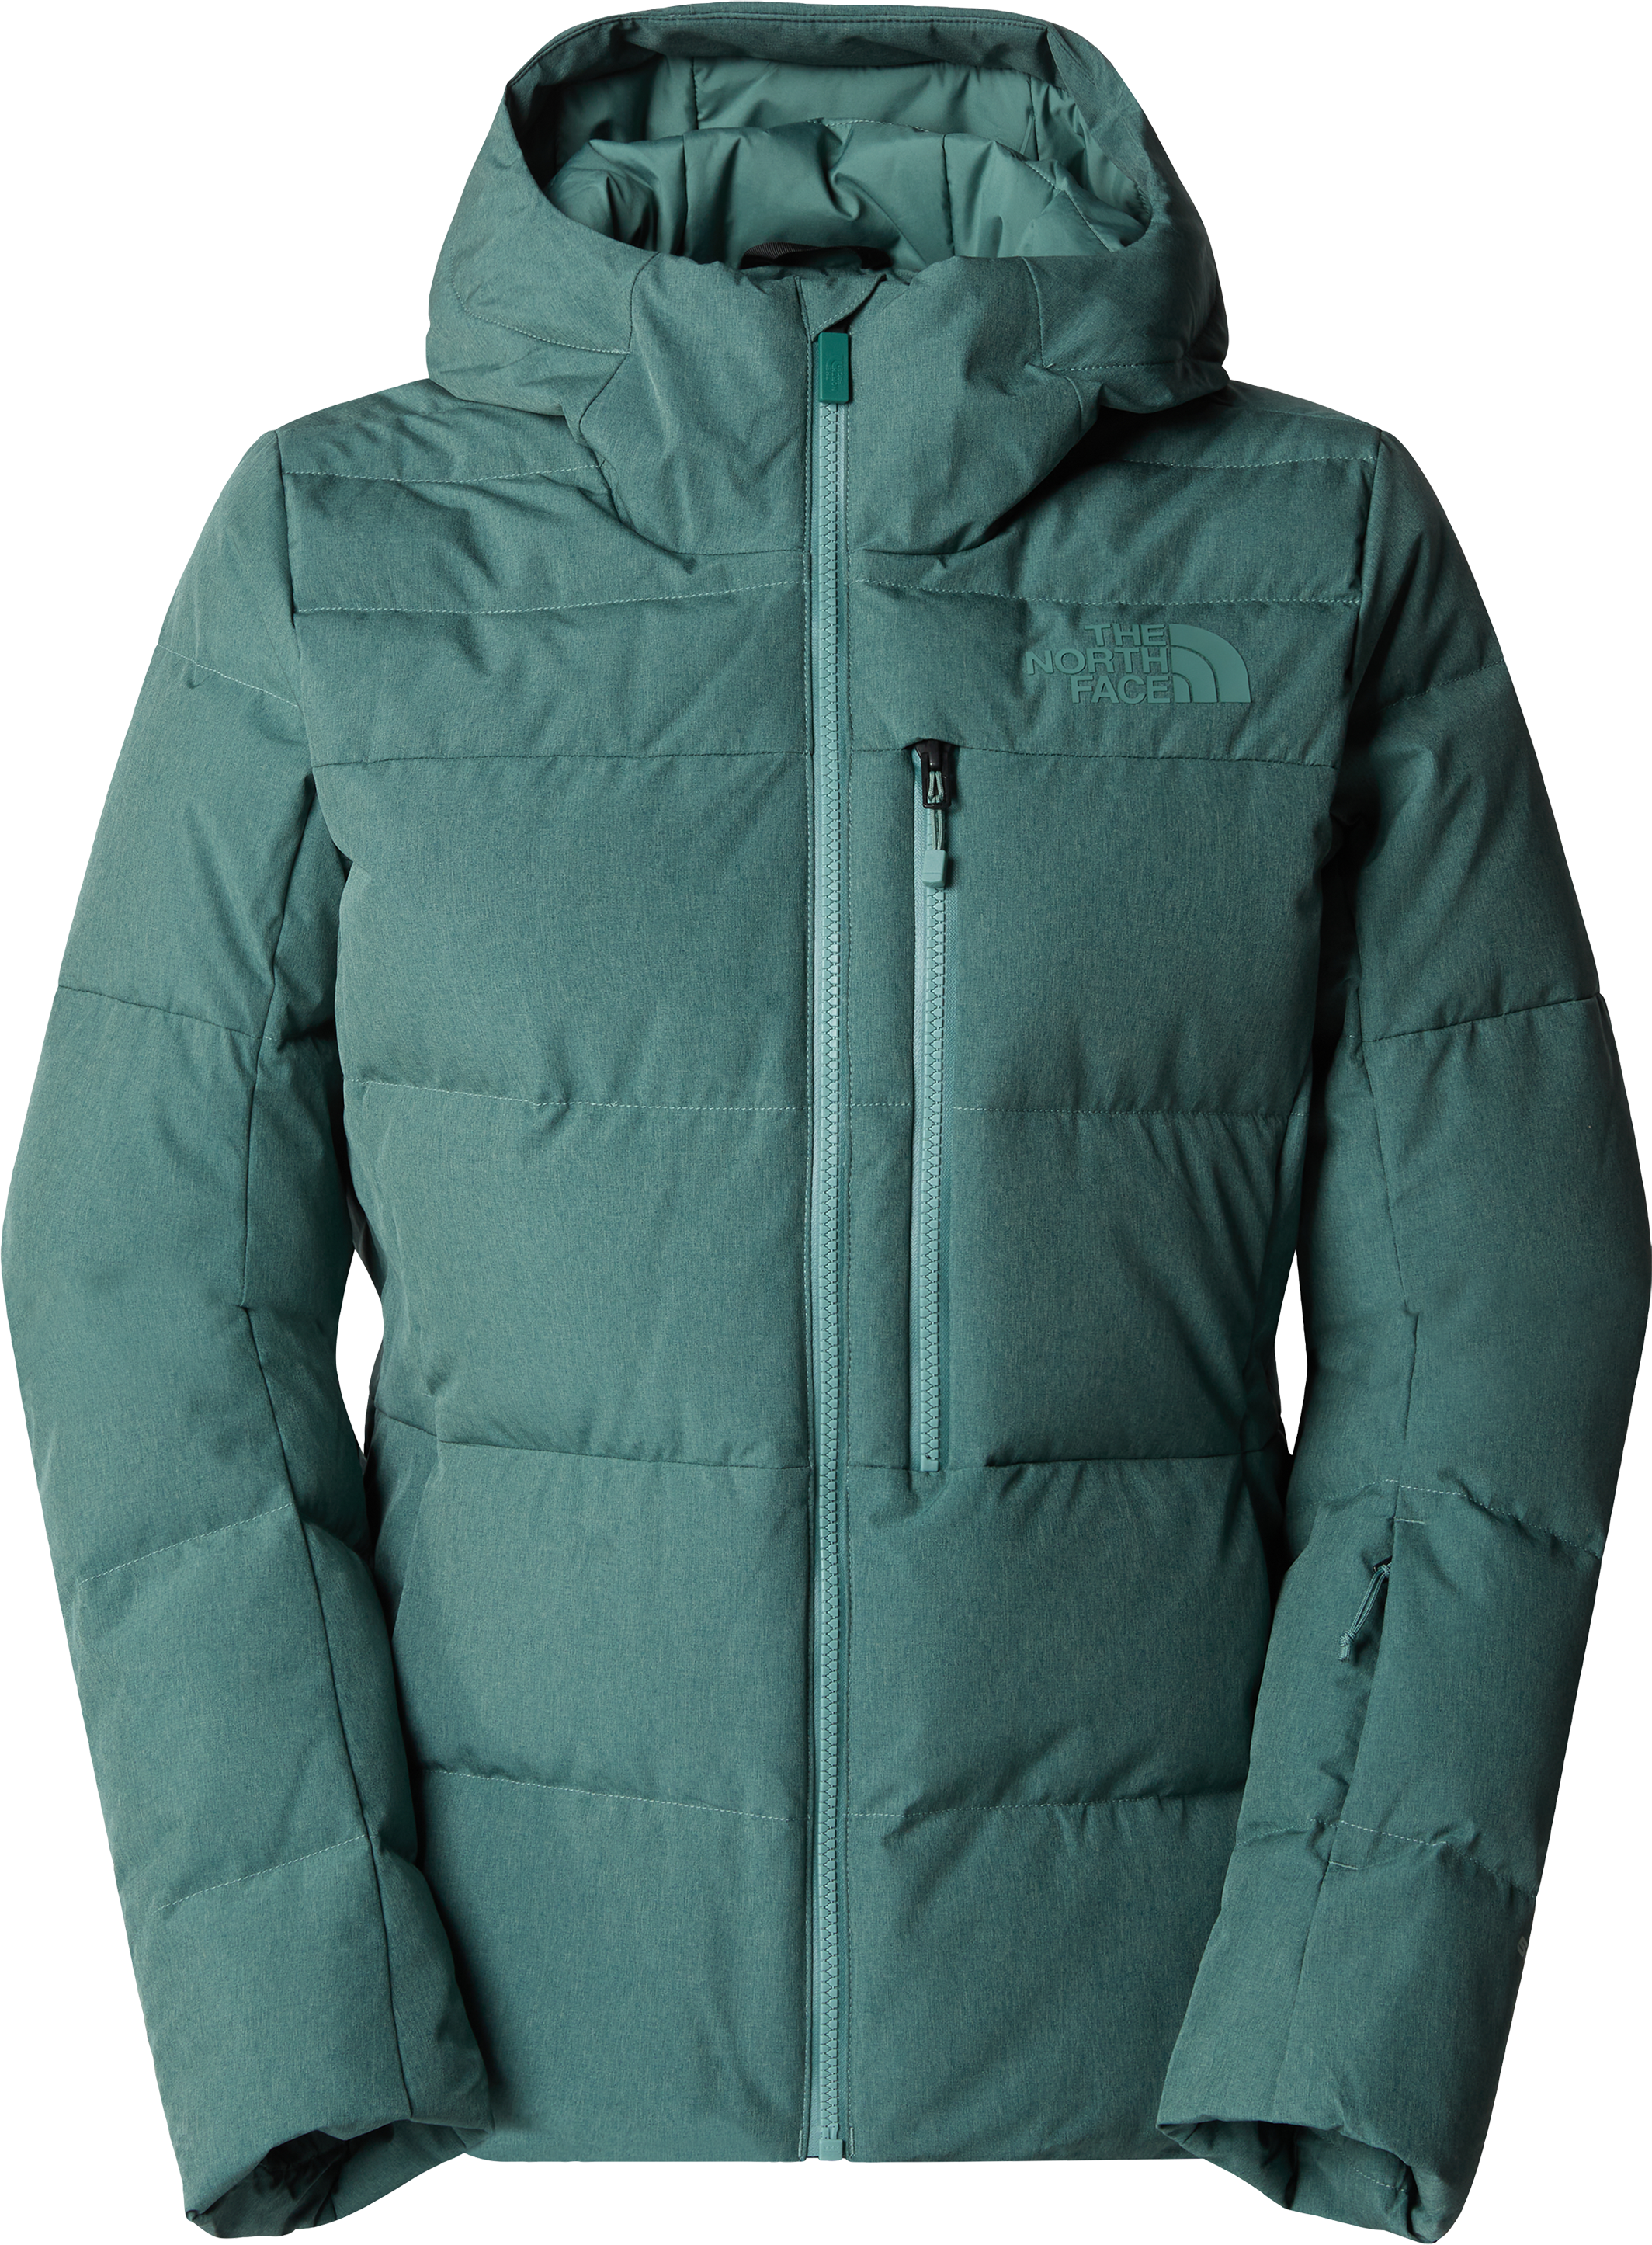 https://www.fjellsport.no/assets/blobs/the-north-face-women-s-heavenly-down-jacket-dark-sage-heather-8a5ca10b11.png